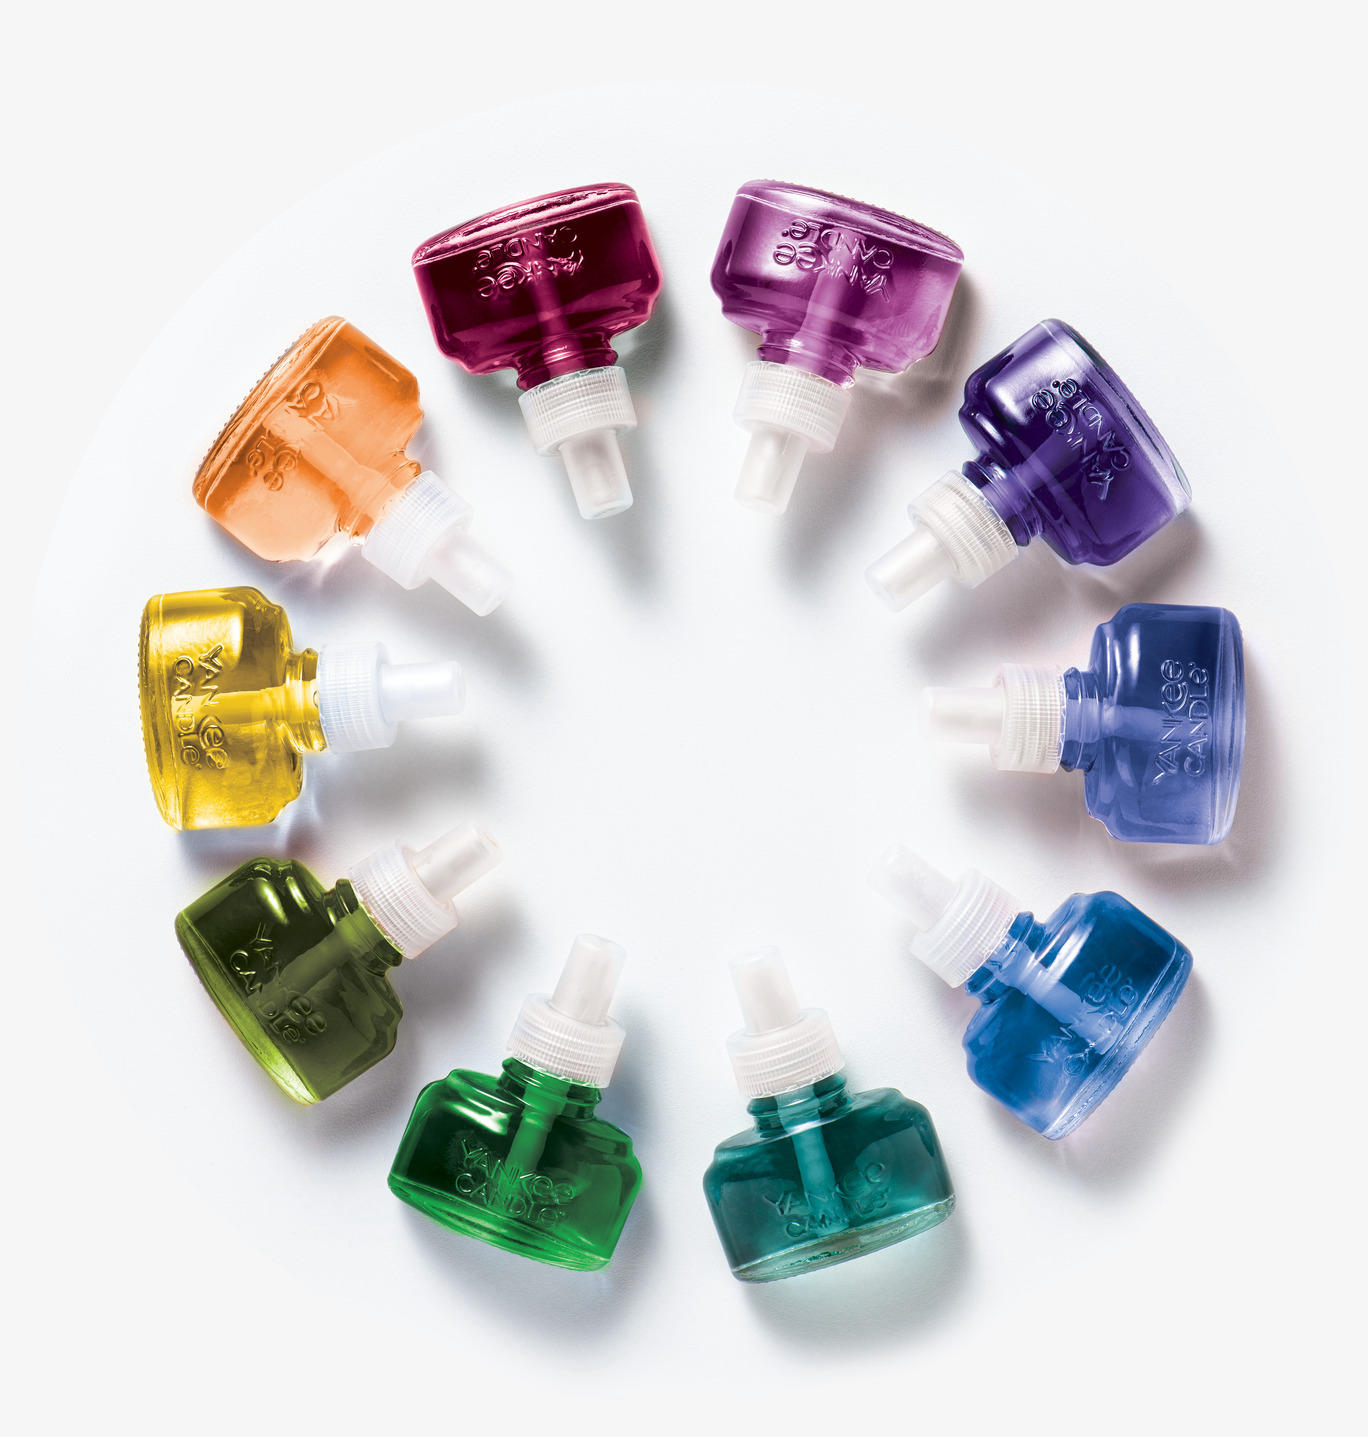 Try something new this year and experience a long-lasting continuous fragrance with our Scent Plug D